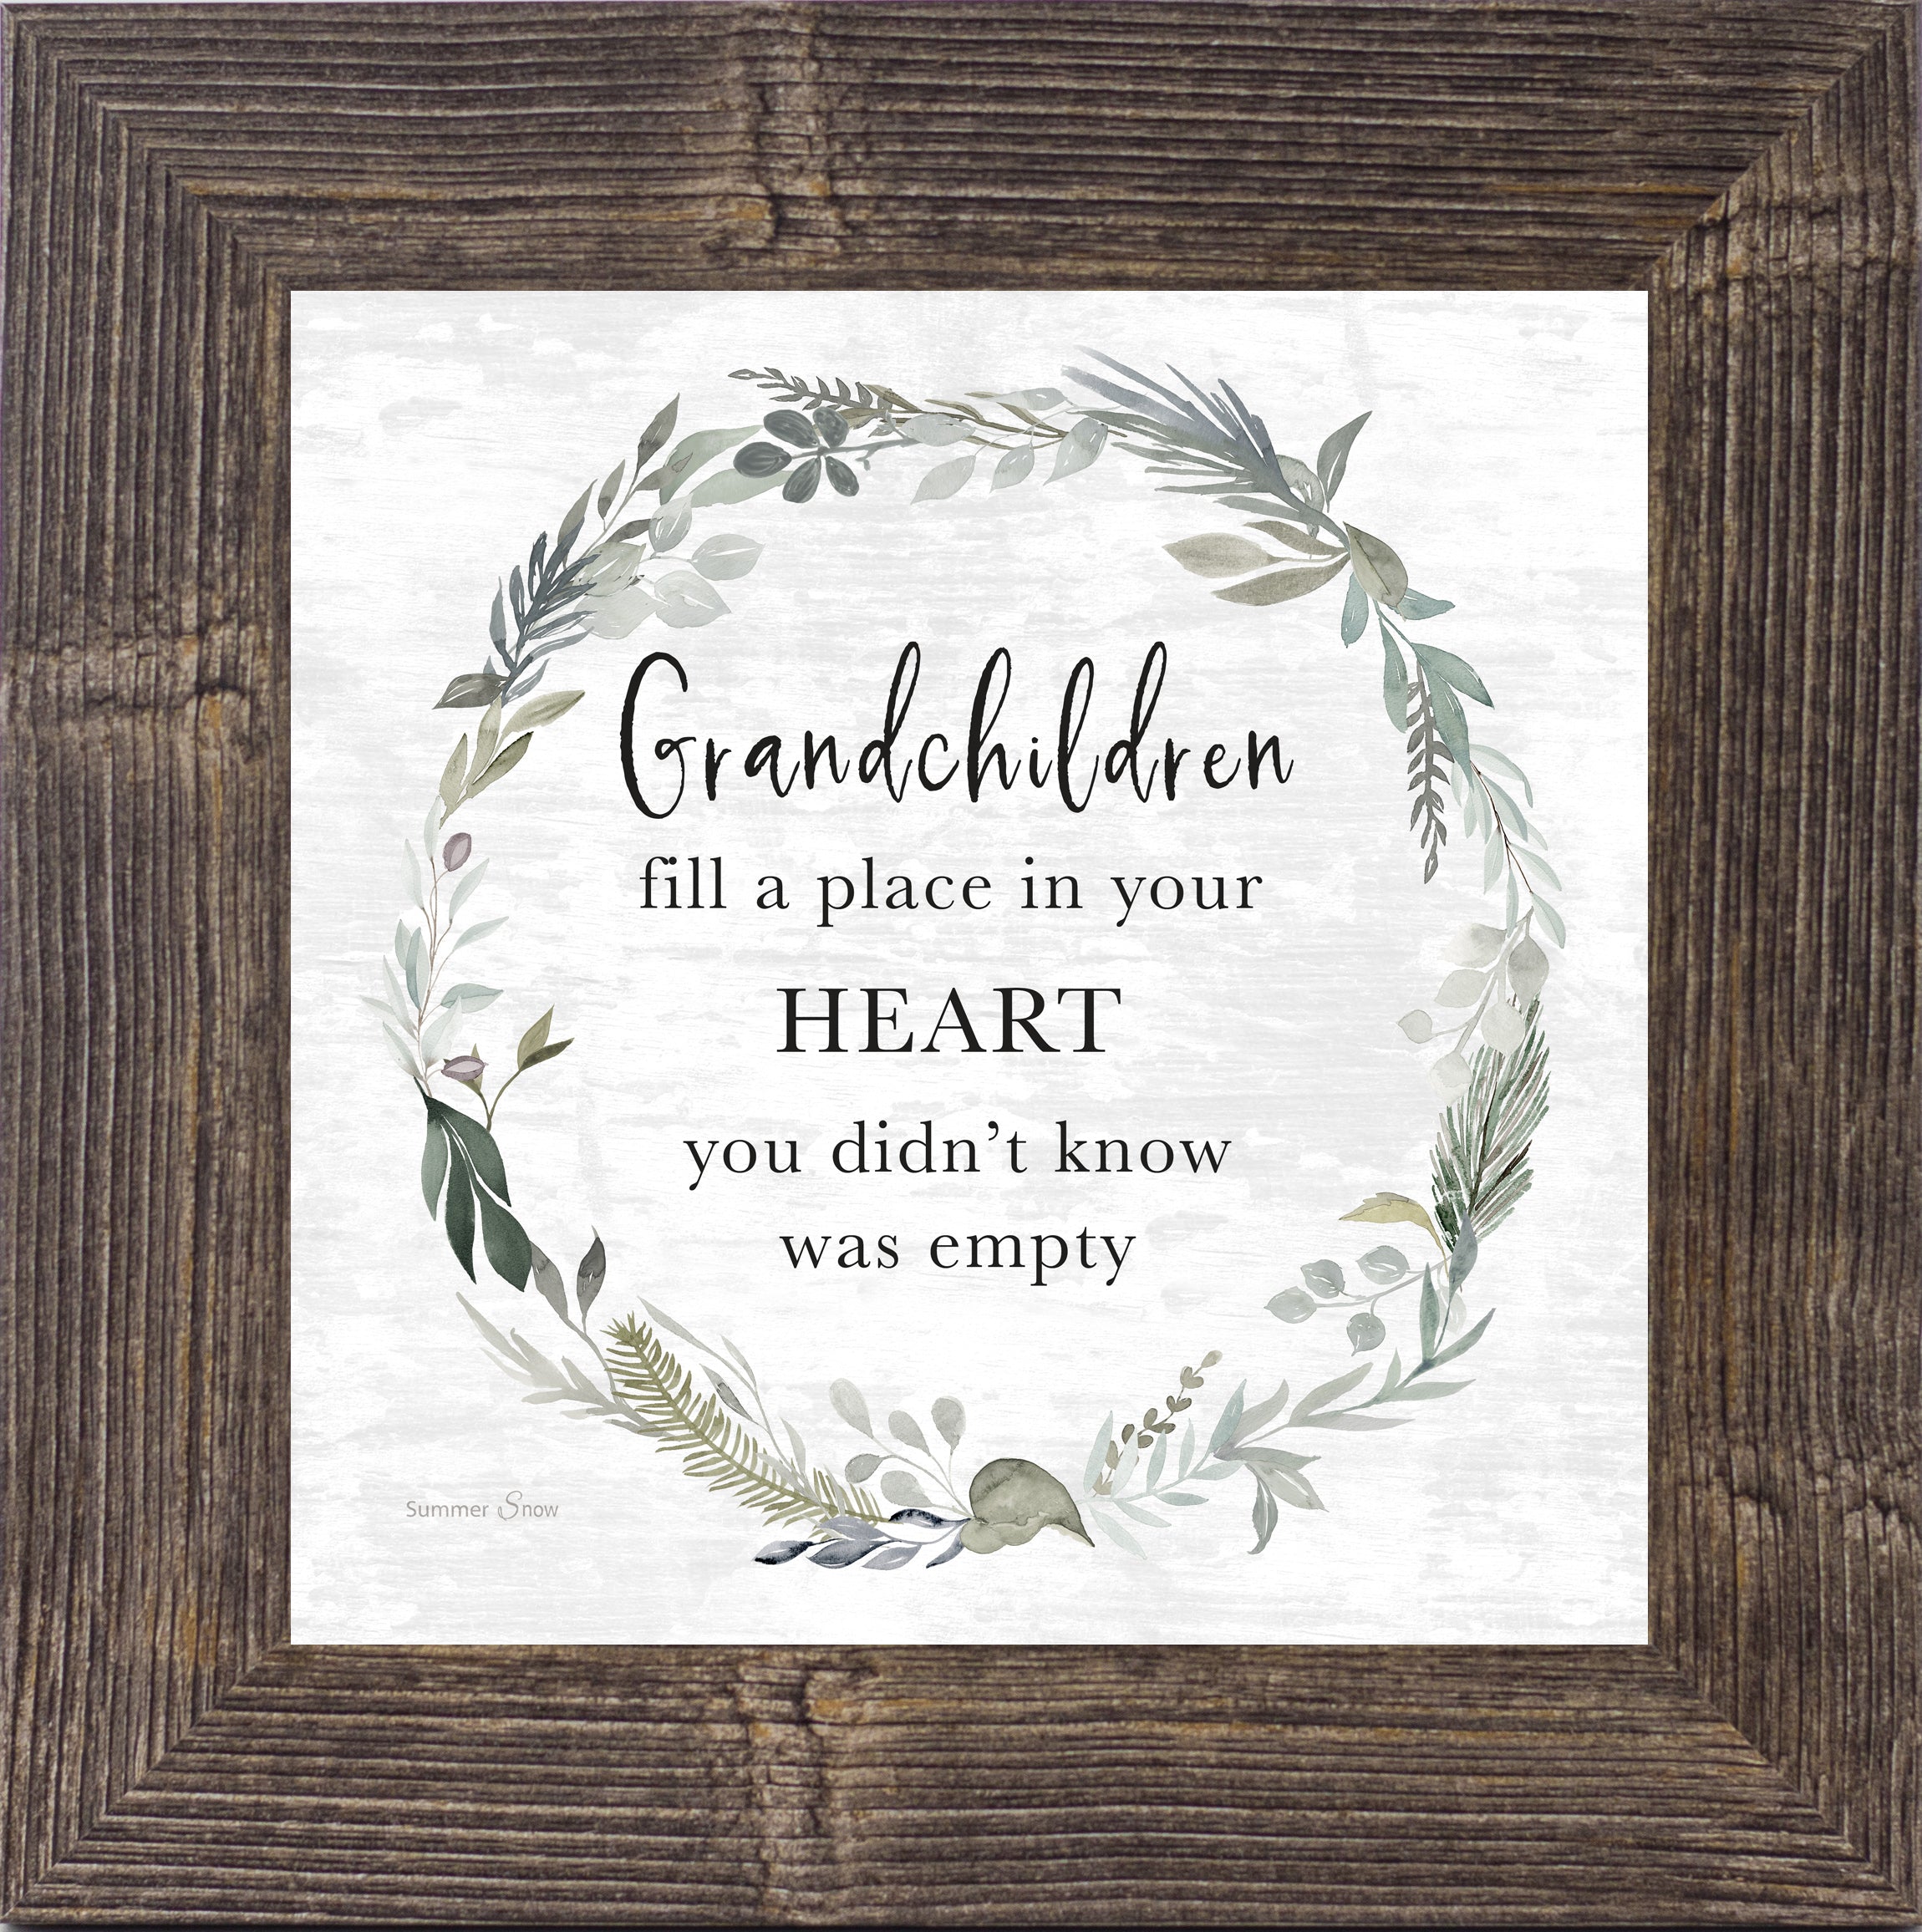 Grandchildren Fill a Place in Your Heart by Summer Snow SS936